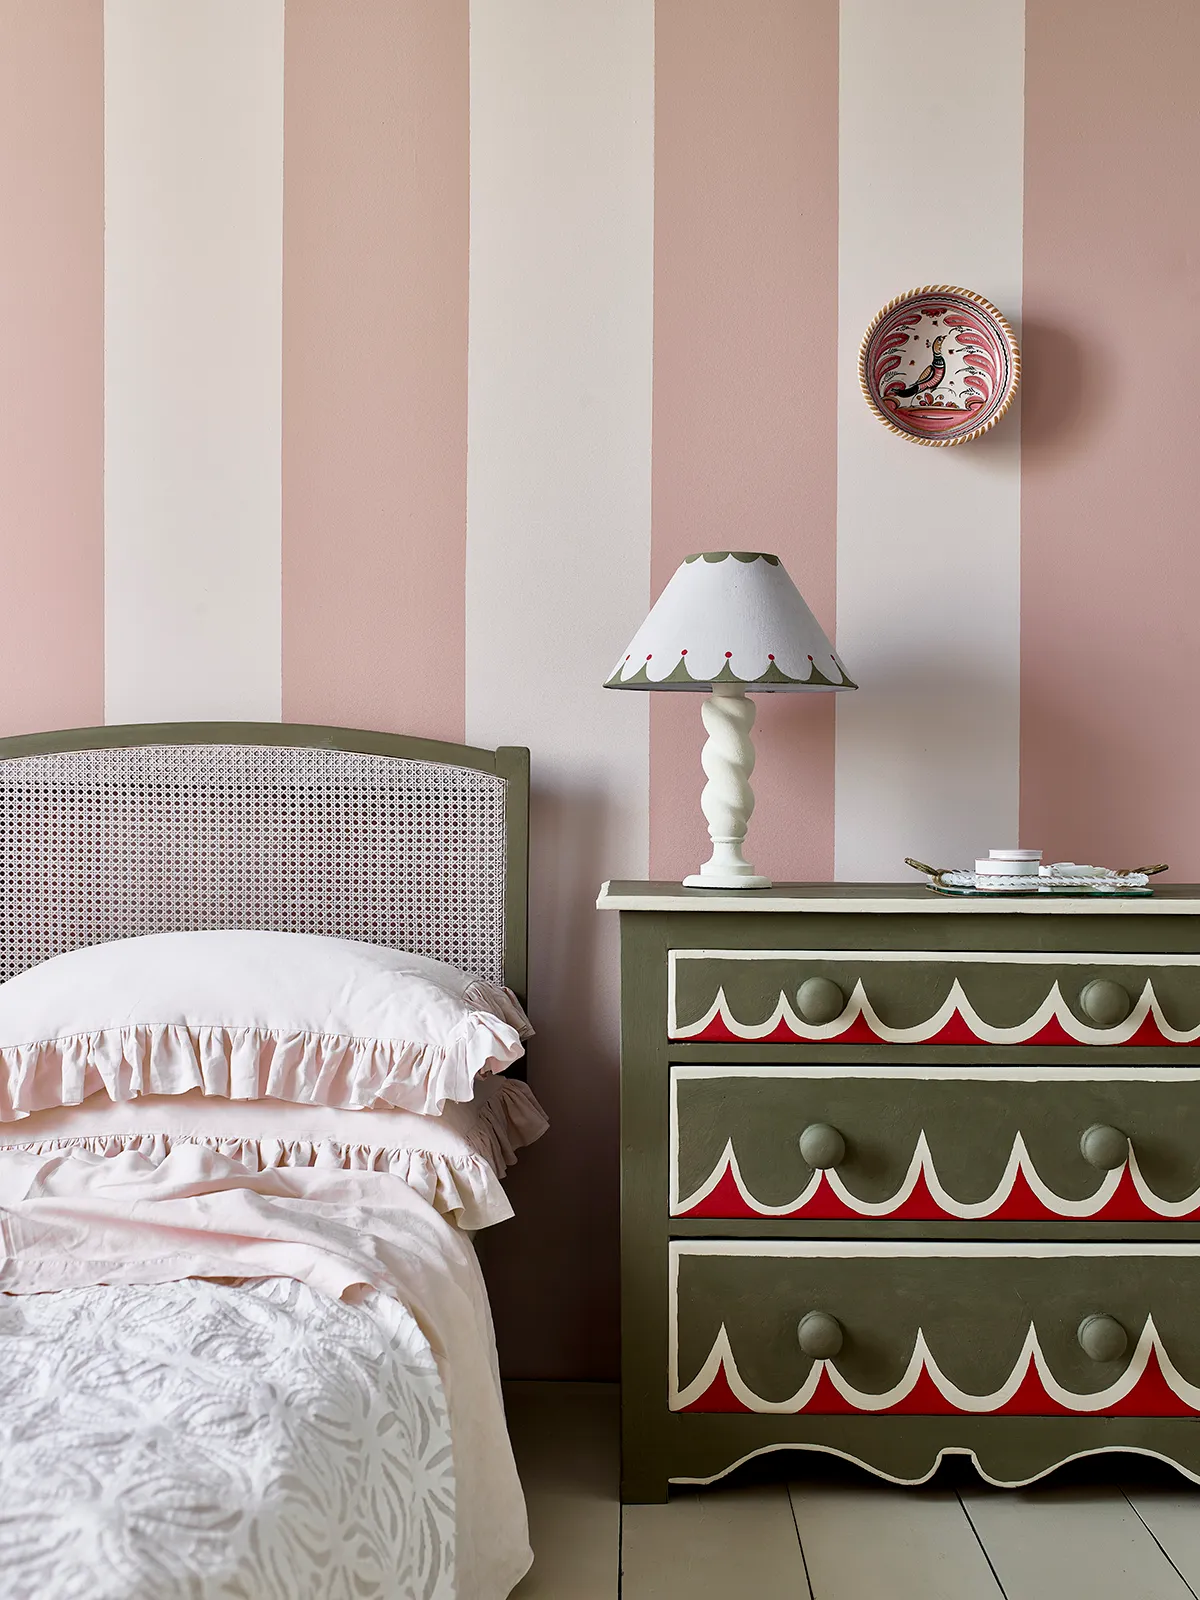 The Best Chalk Paints For Furniture Upcycling ⋆ A Rose Tinted World